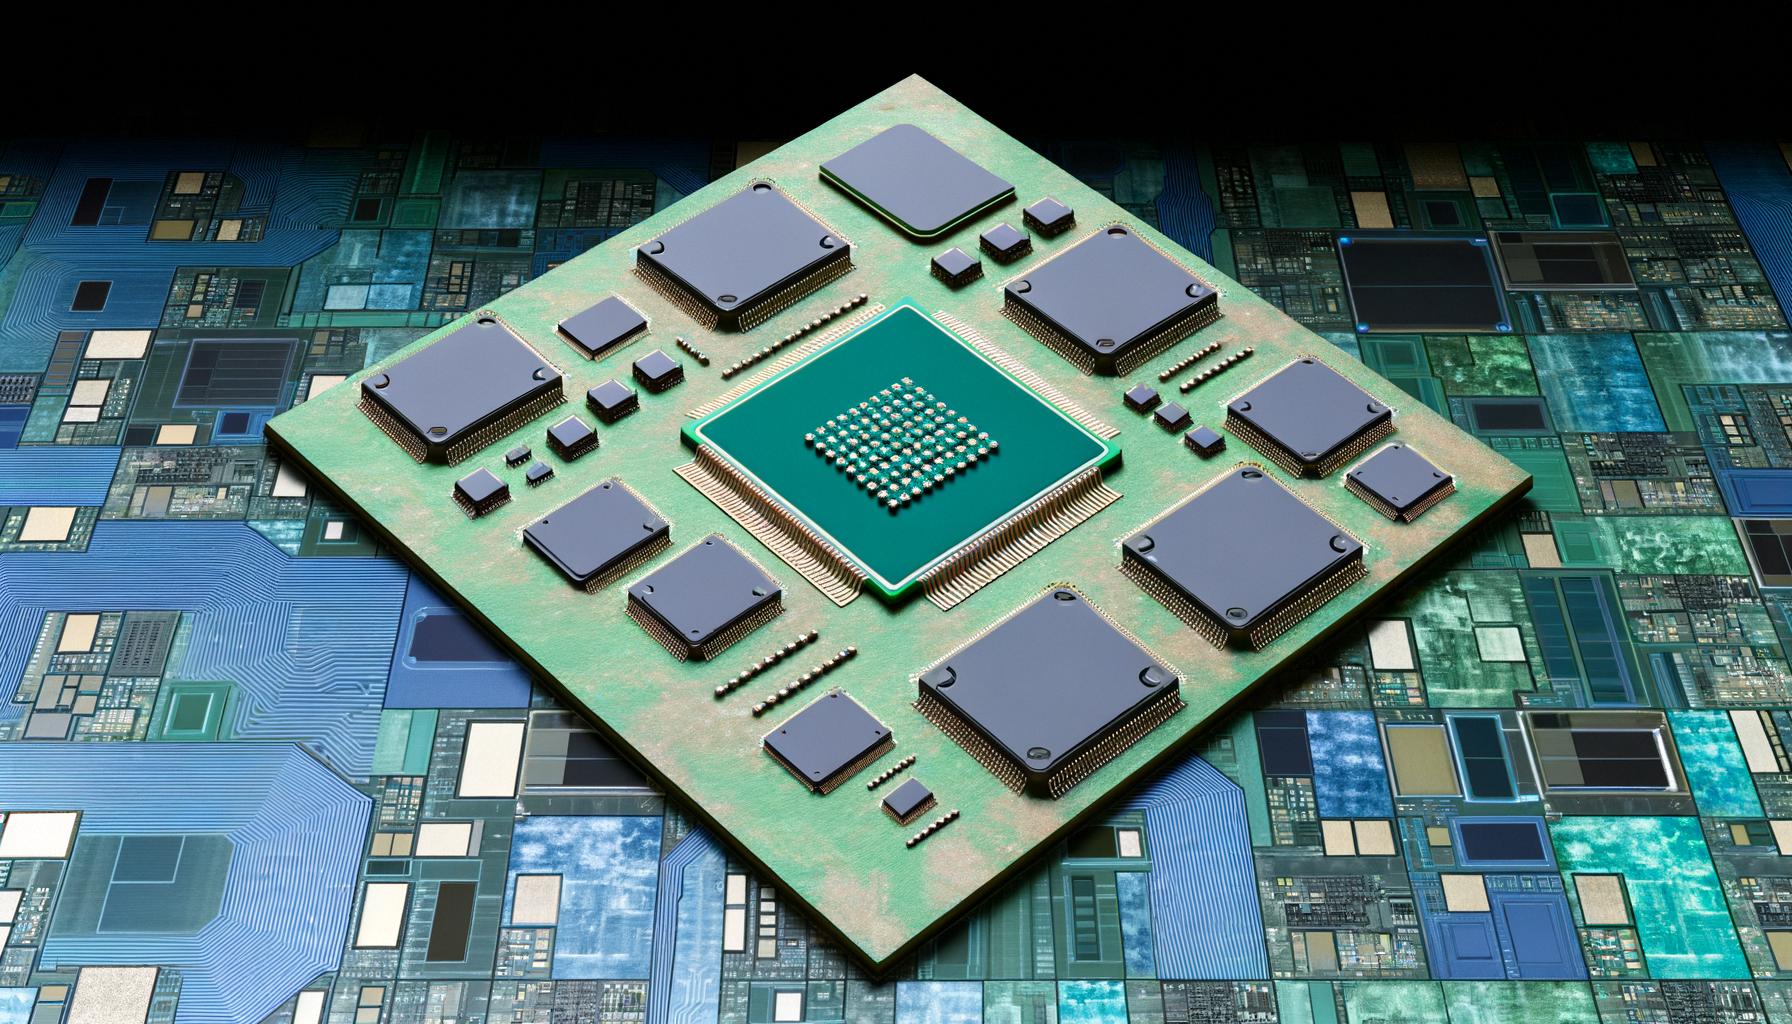 AMD modifies chip architectures targeting integrated AI capabilities.